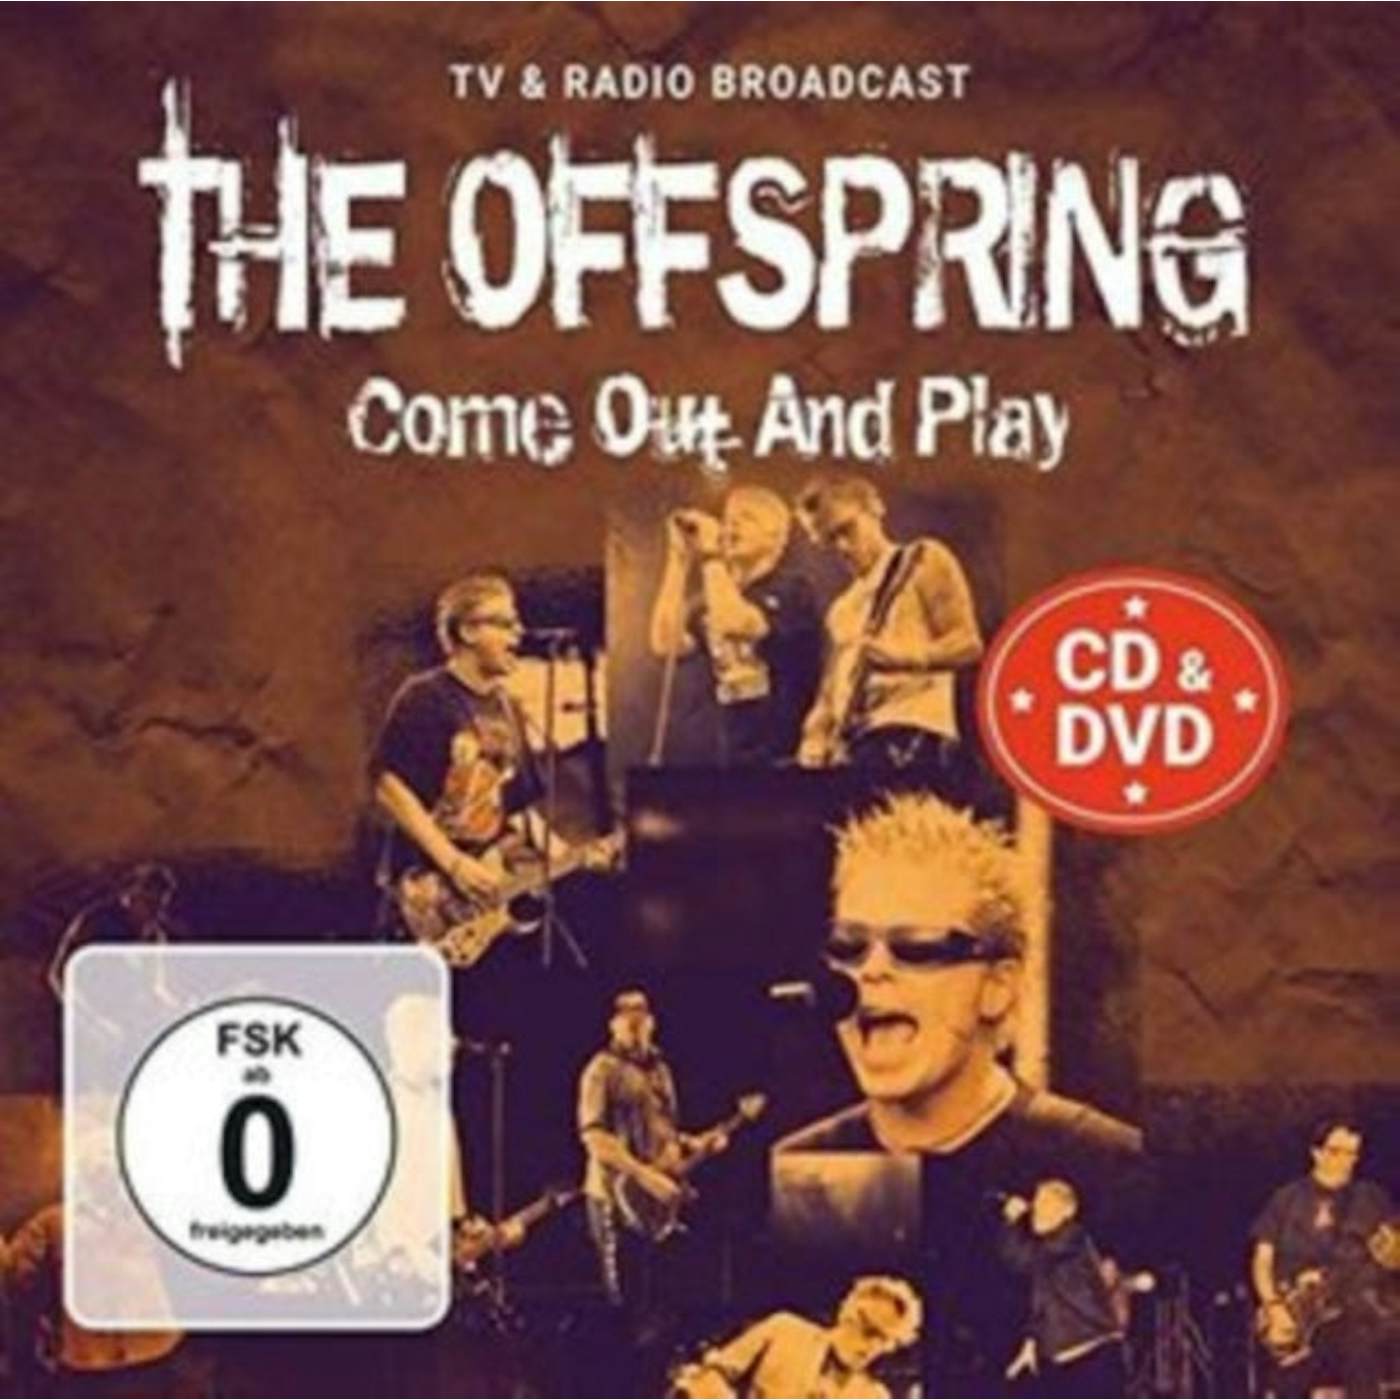 The Offspring CD - Come Out And Play / Radio & Tv Broadcast (Cd+Dvd)